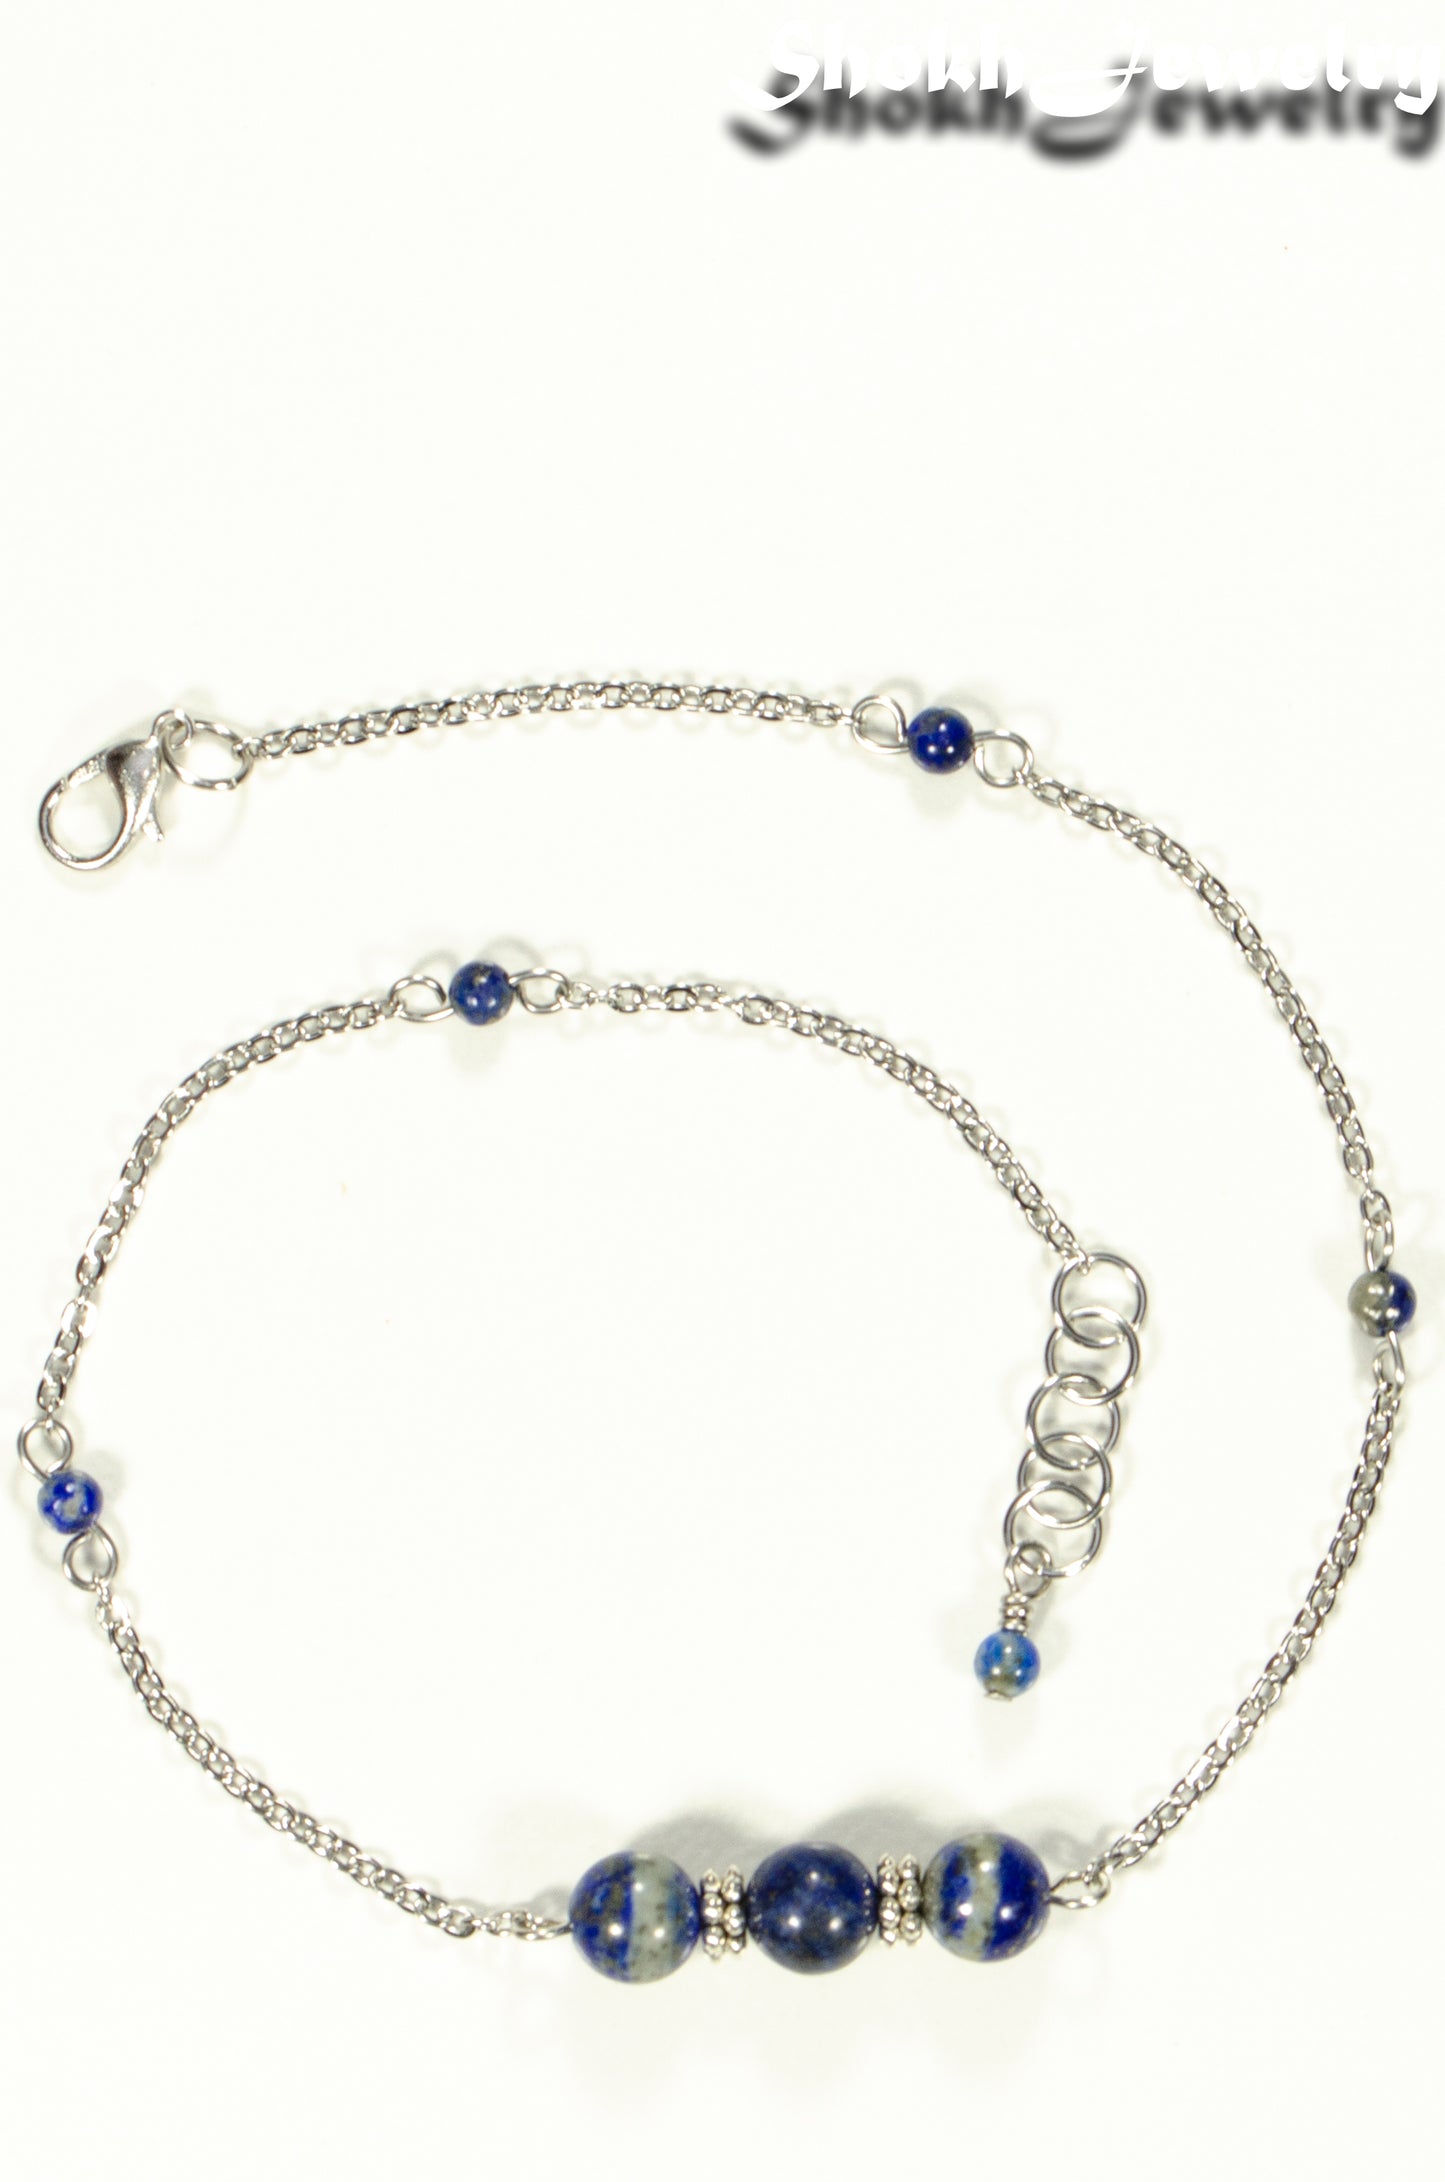 Top view of Natural Lapis Lazuli and Chain Choker Necklace.